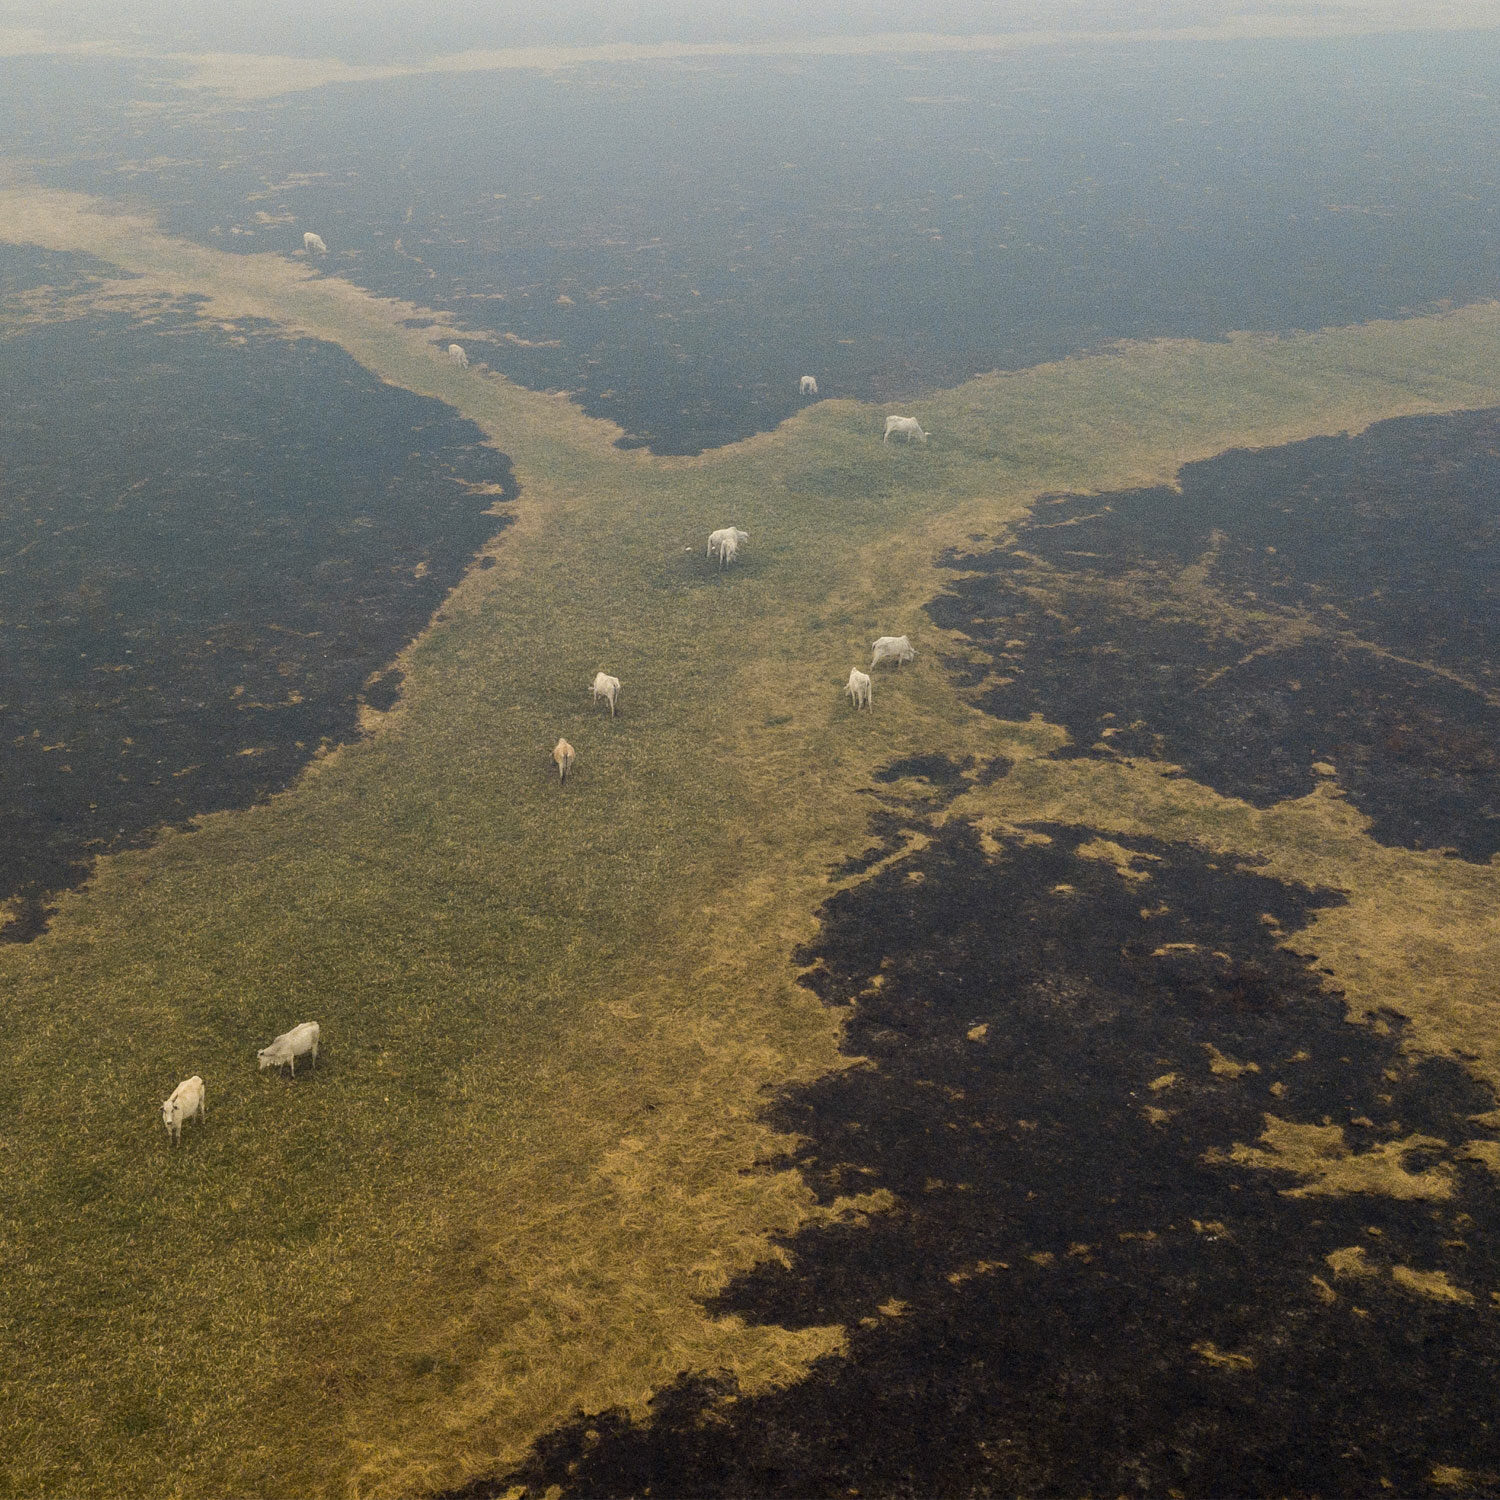 cows grazing on burned deforested farm land